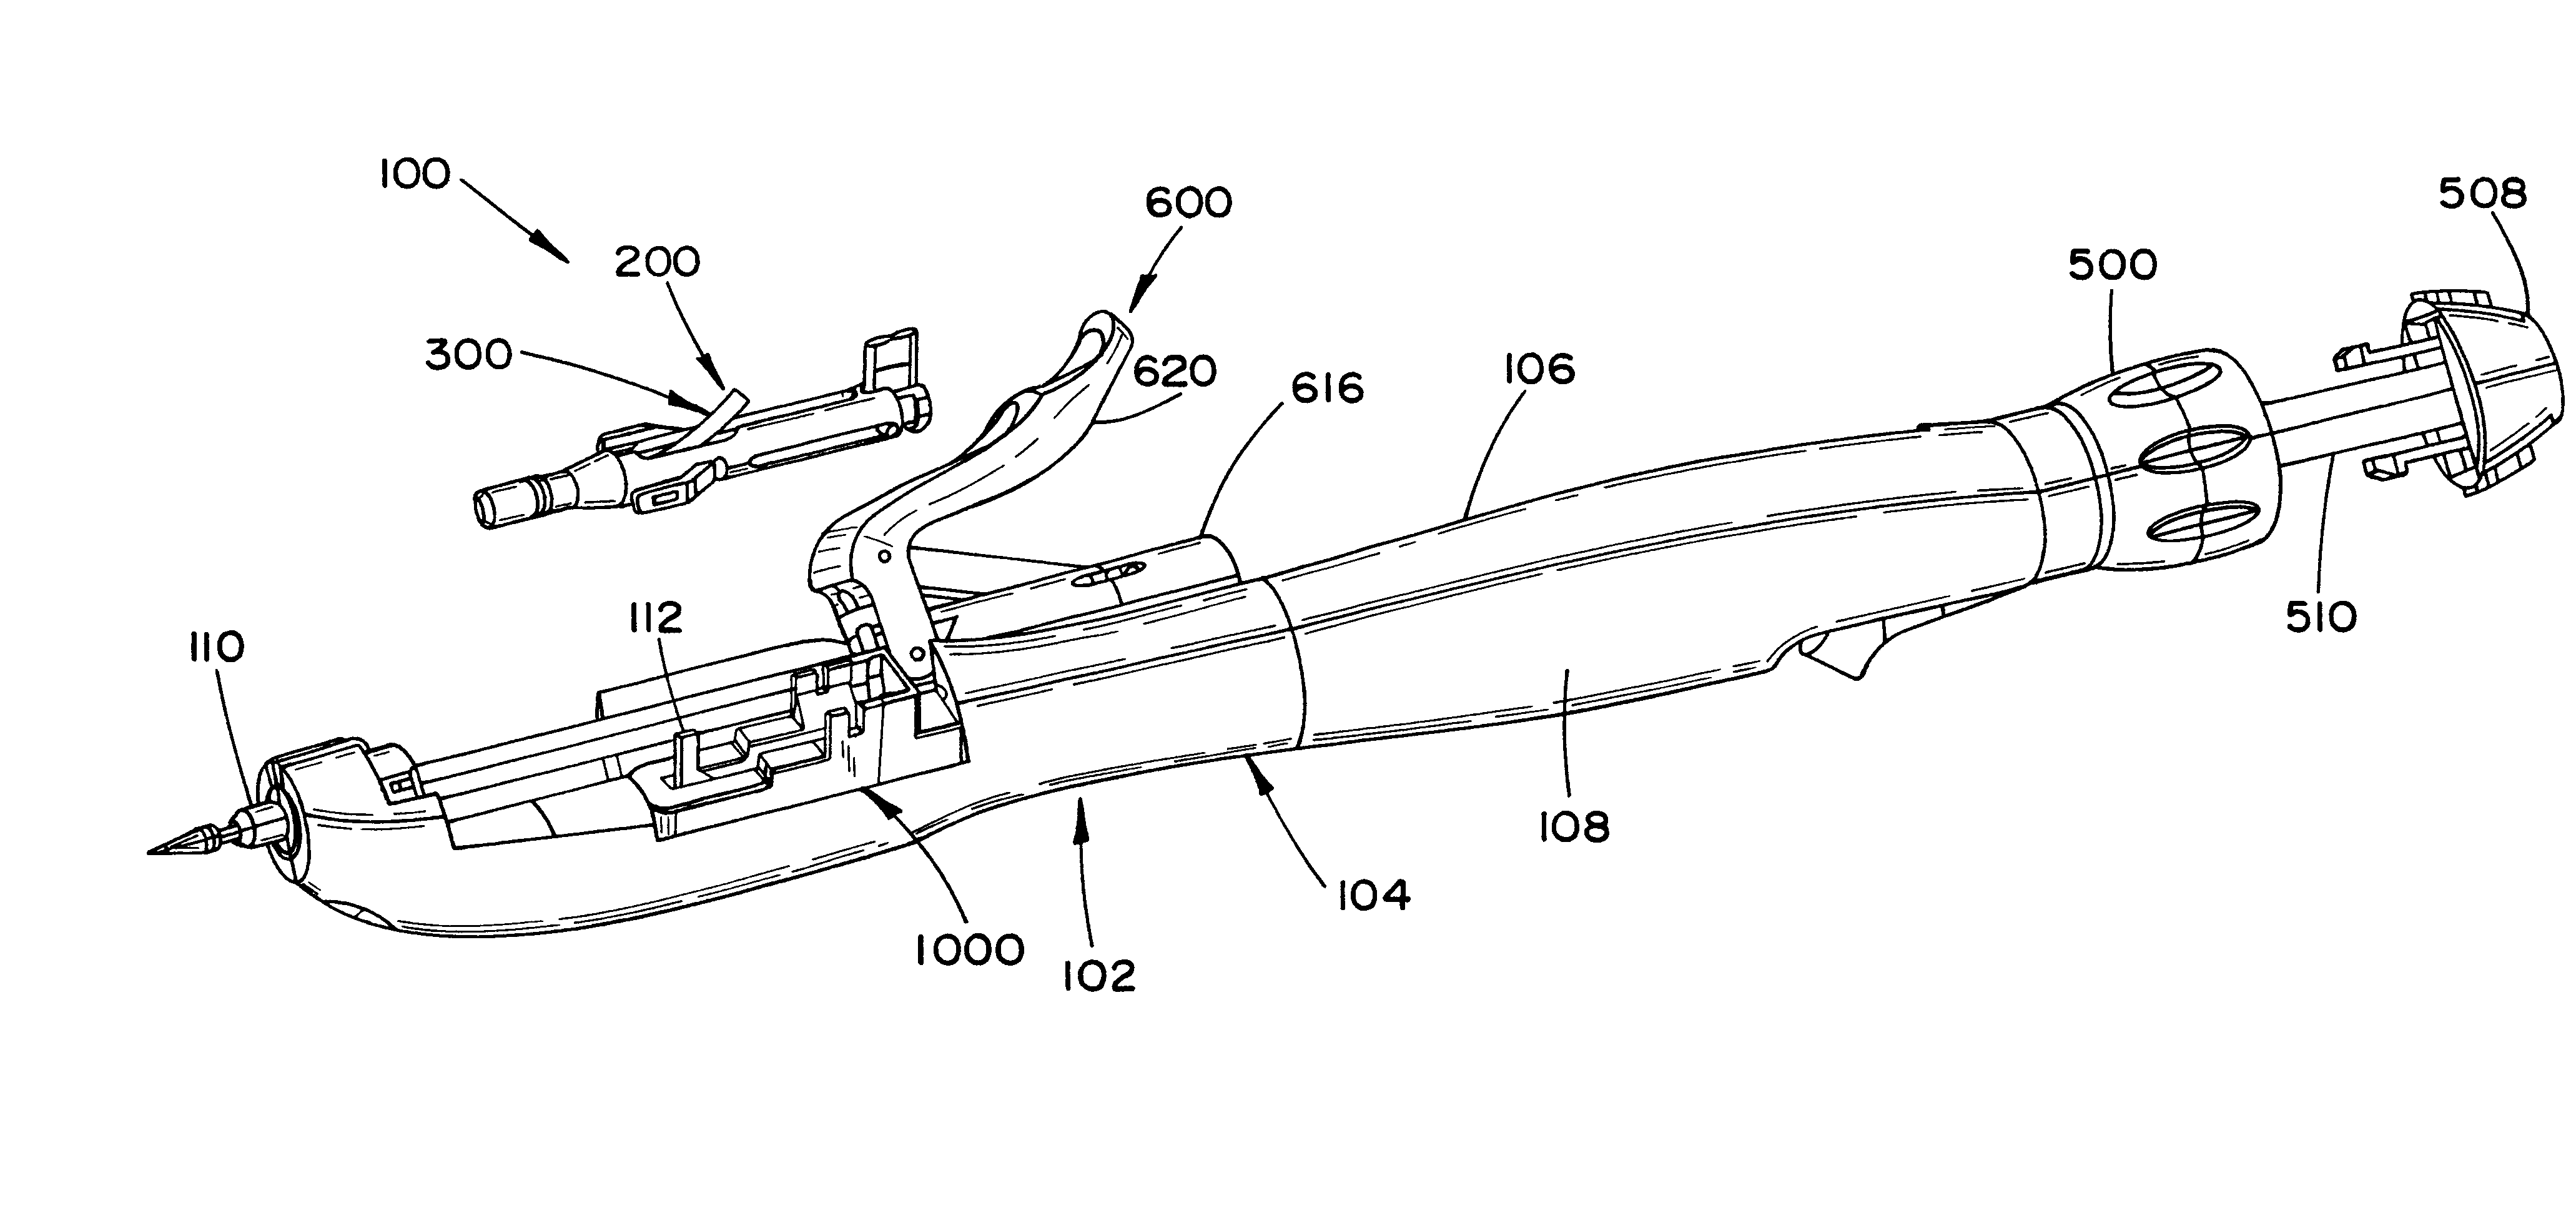 Surgical device for creating an anastomosis between first and second hollow organs